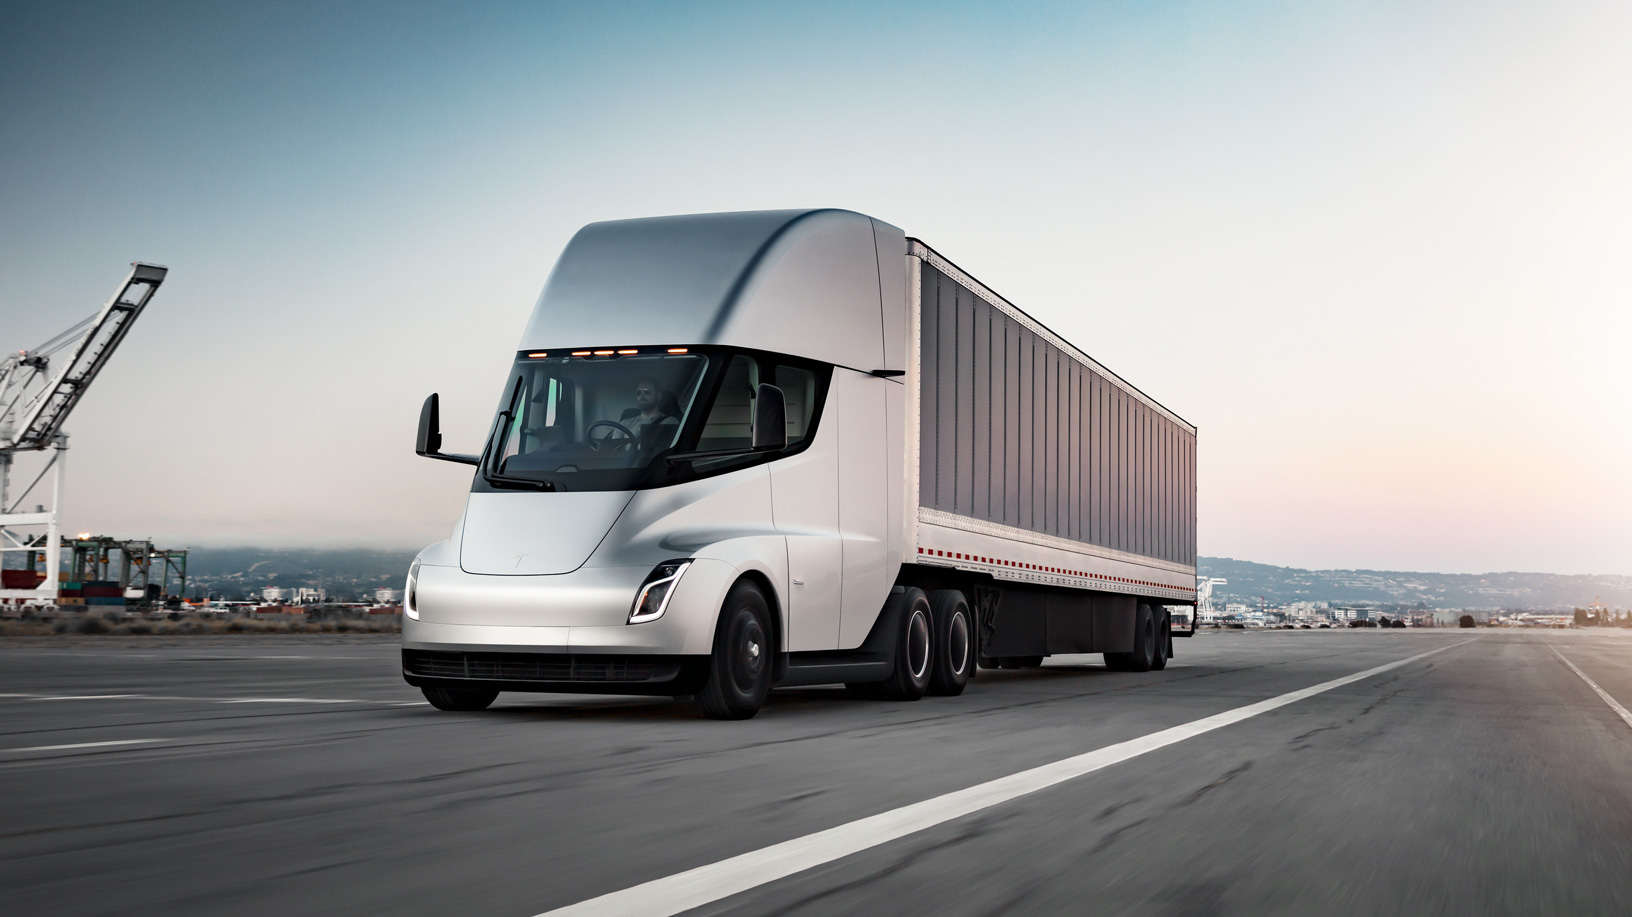 Electric Truck Market Report Examines Business Opportunity and Worldwide Scope by Forecast 2032 |  Tevva (U.K.), Volta Trucks (Sweden), StreetScooter (Germany), E-Trucks Europe (Netherlands), and Einride (Sweden).